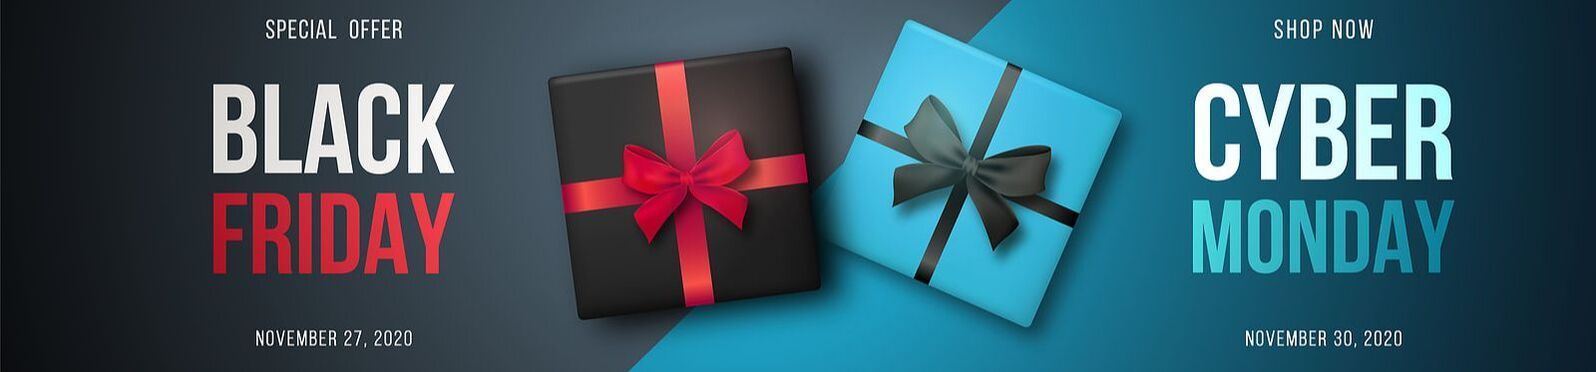 Black Friday and Cyber Monday illustration with two gifts 